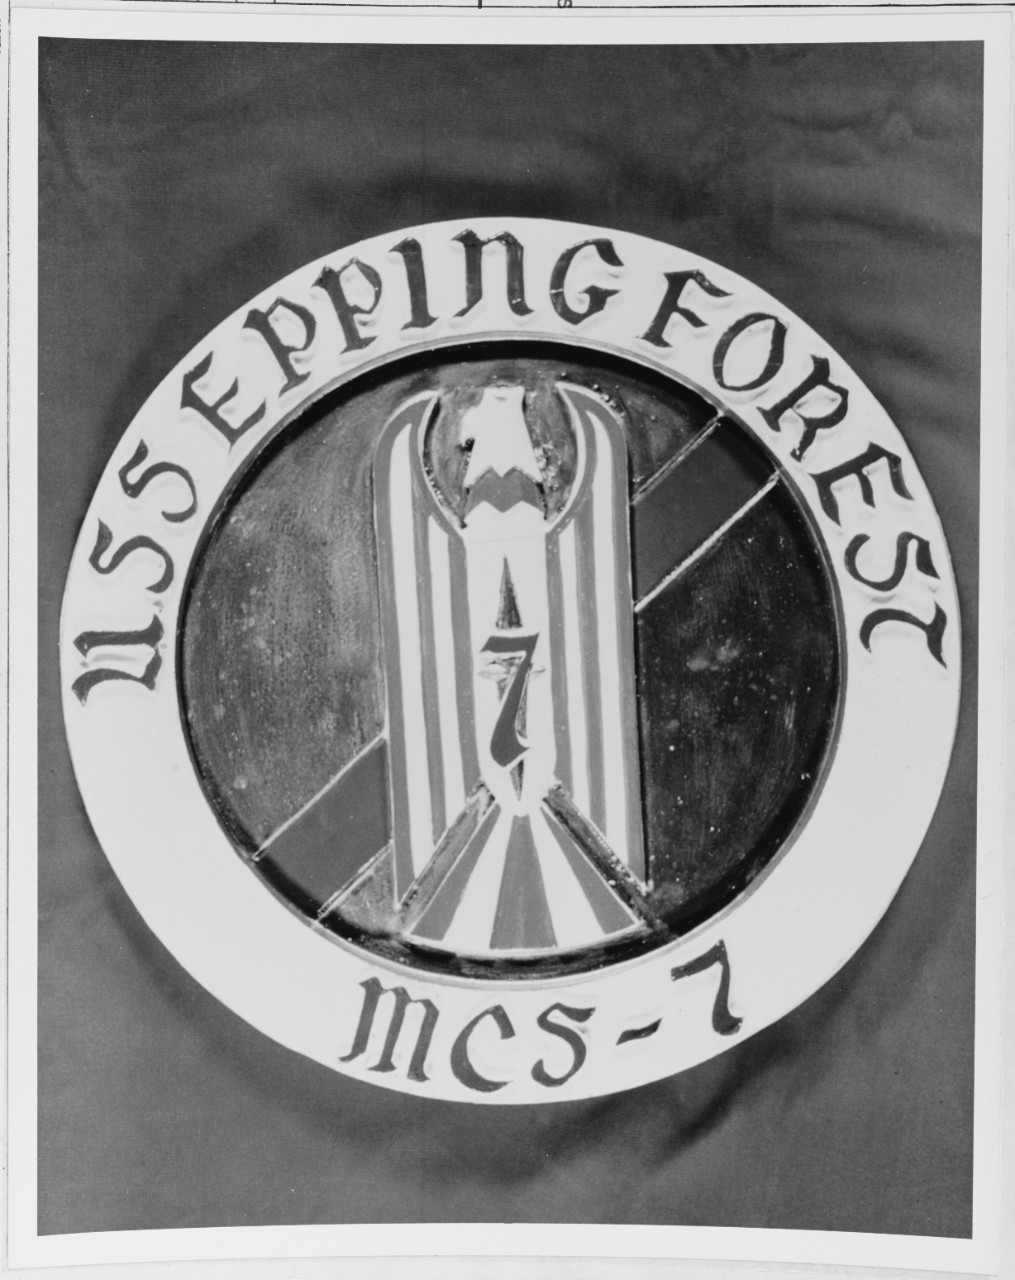 Insignia: USS EPPING FOREST (MCS-7)